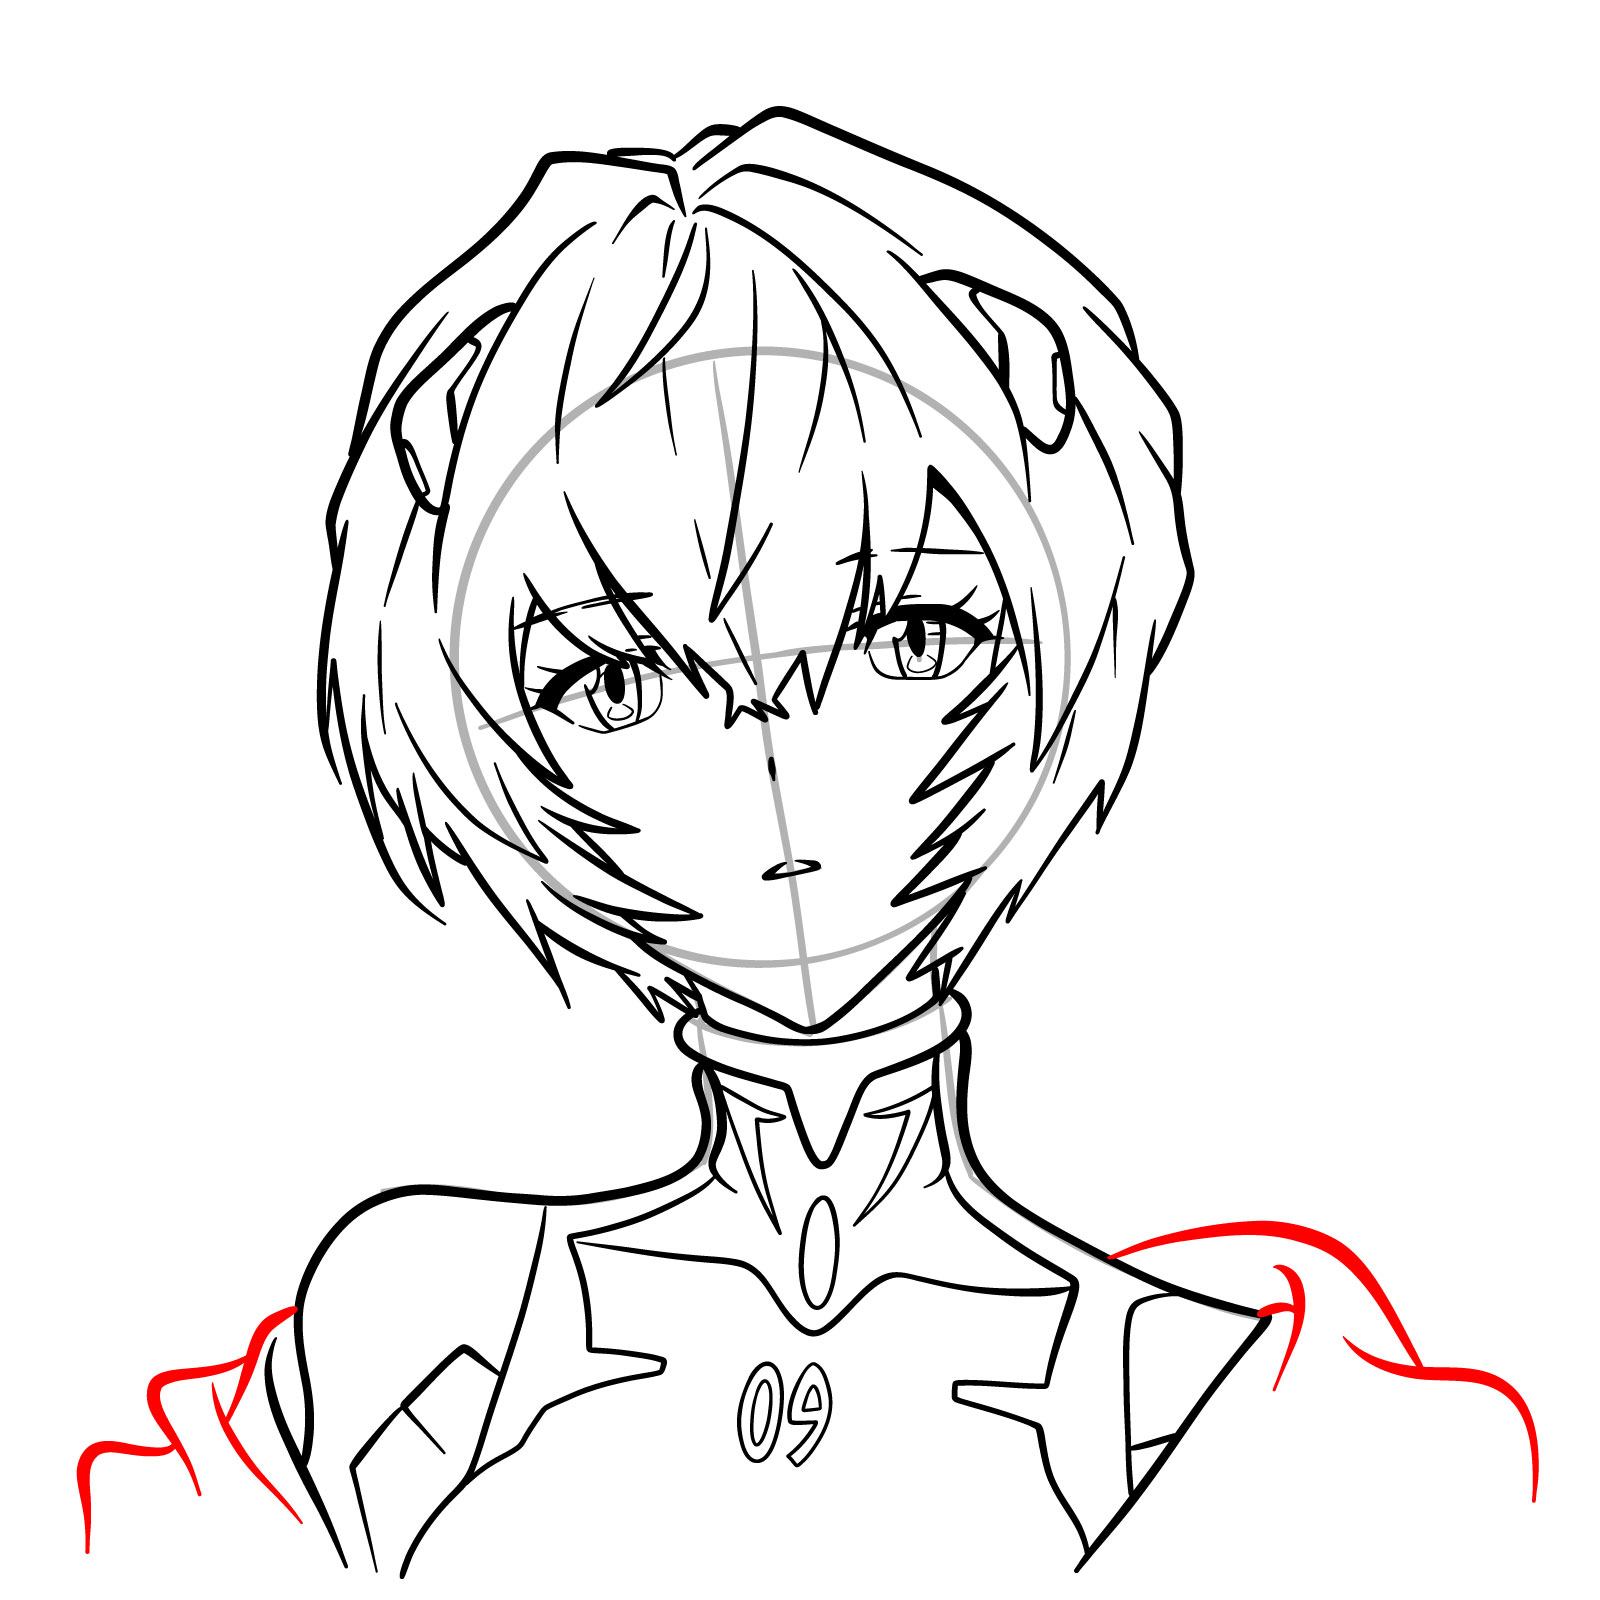 How to draw Rei Ayanami's face - Evangelion - step 21